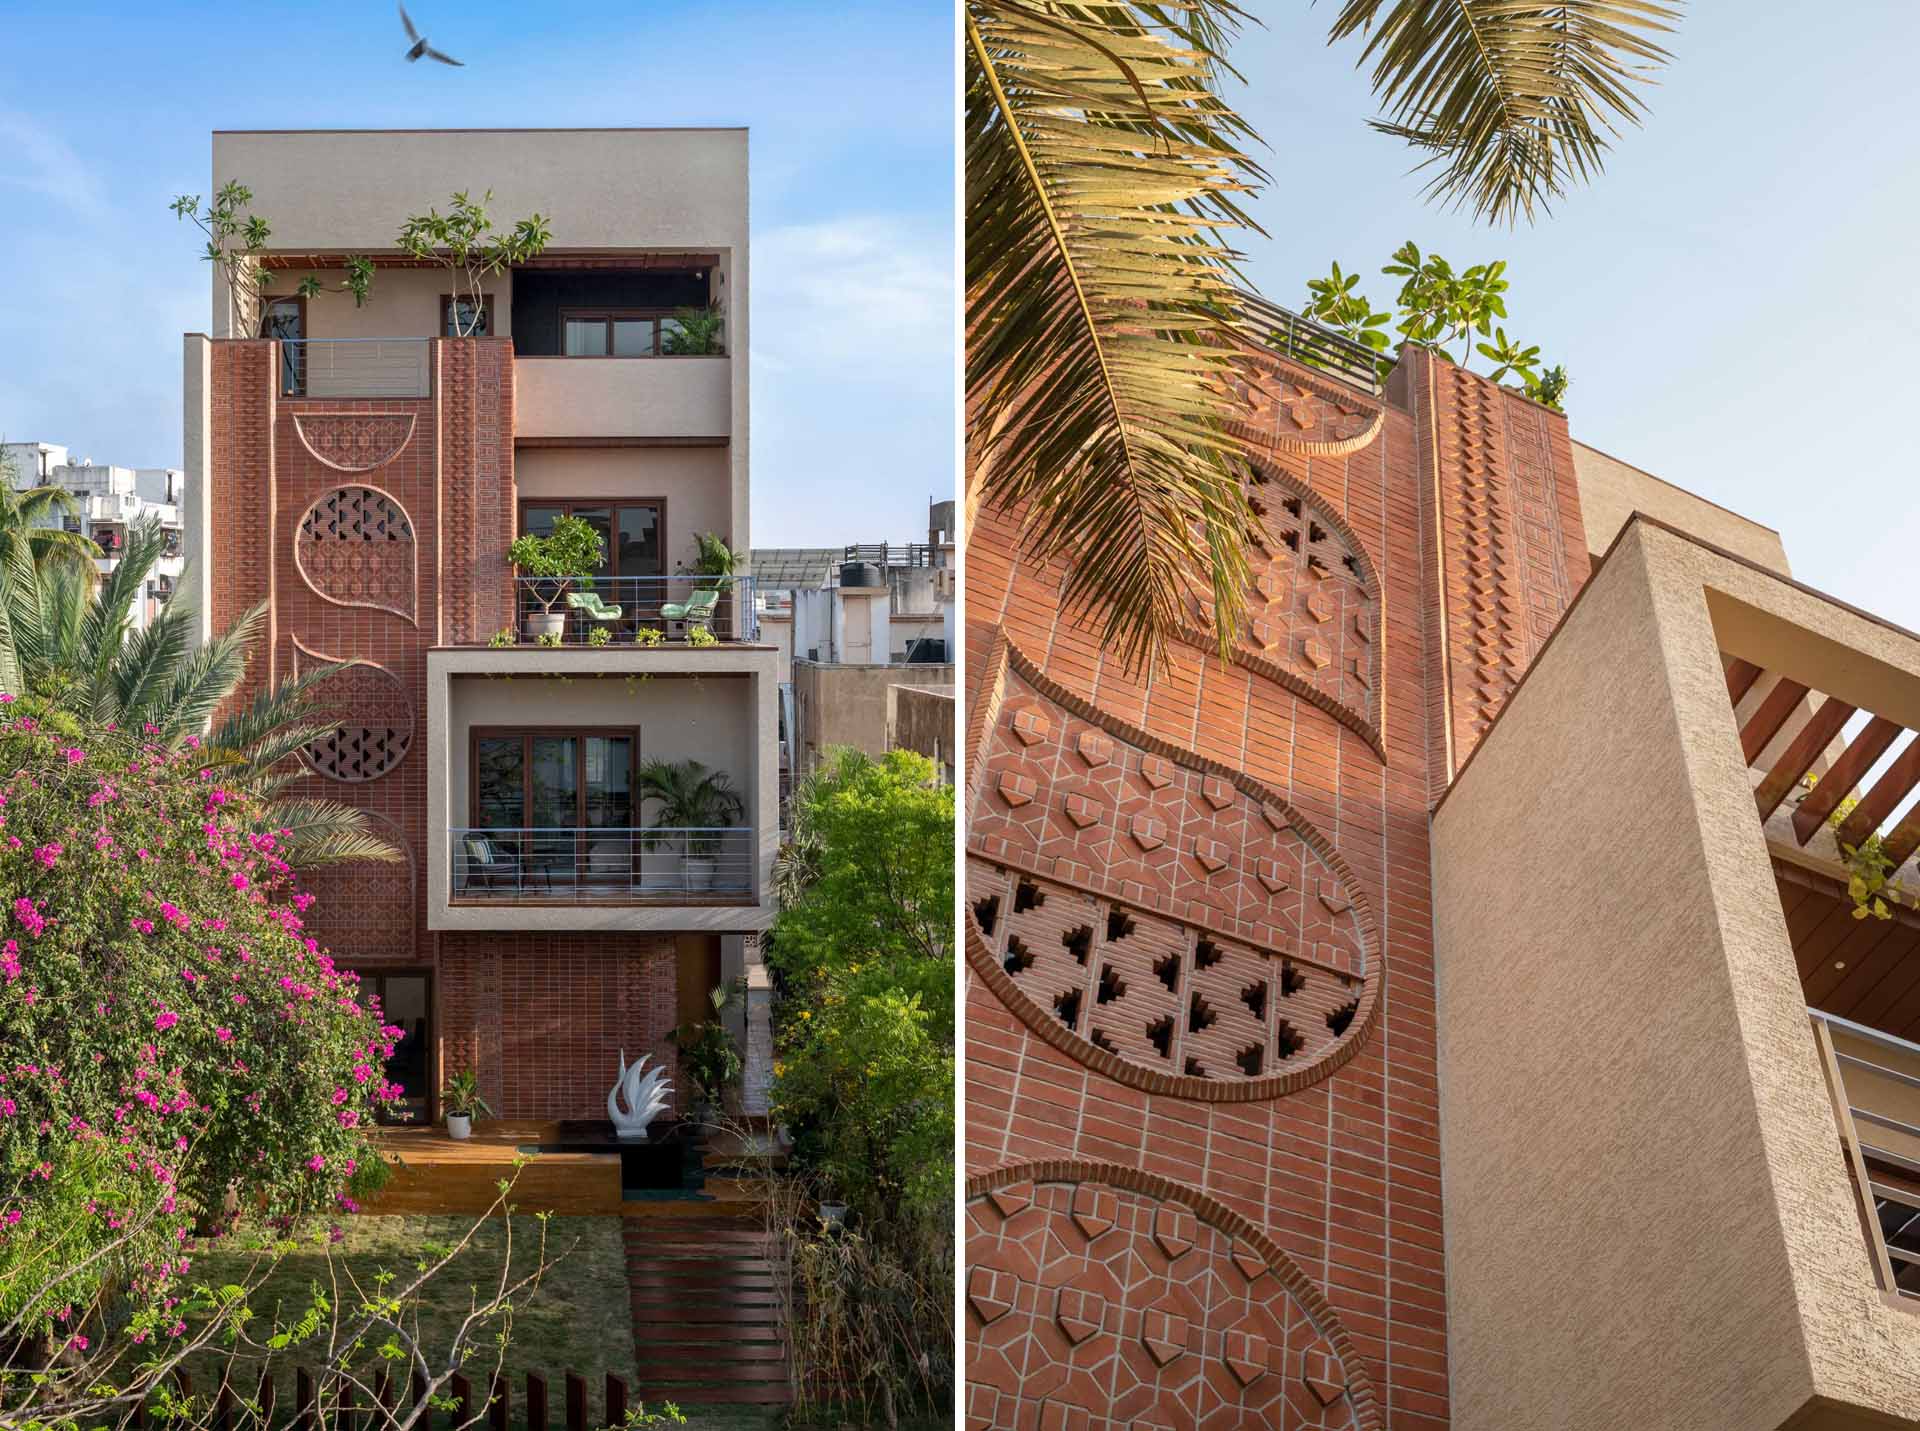 A modern home facade with a variety of brick patterns and unique designs.